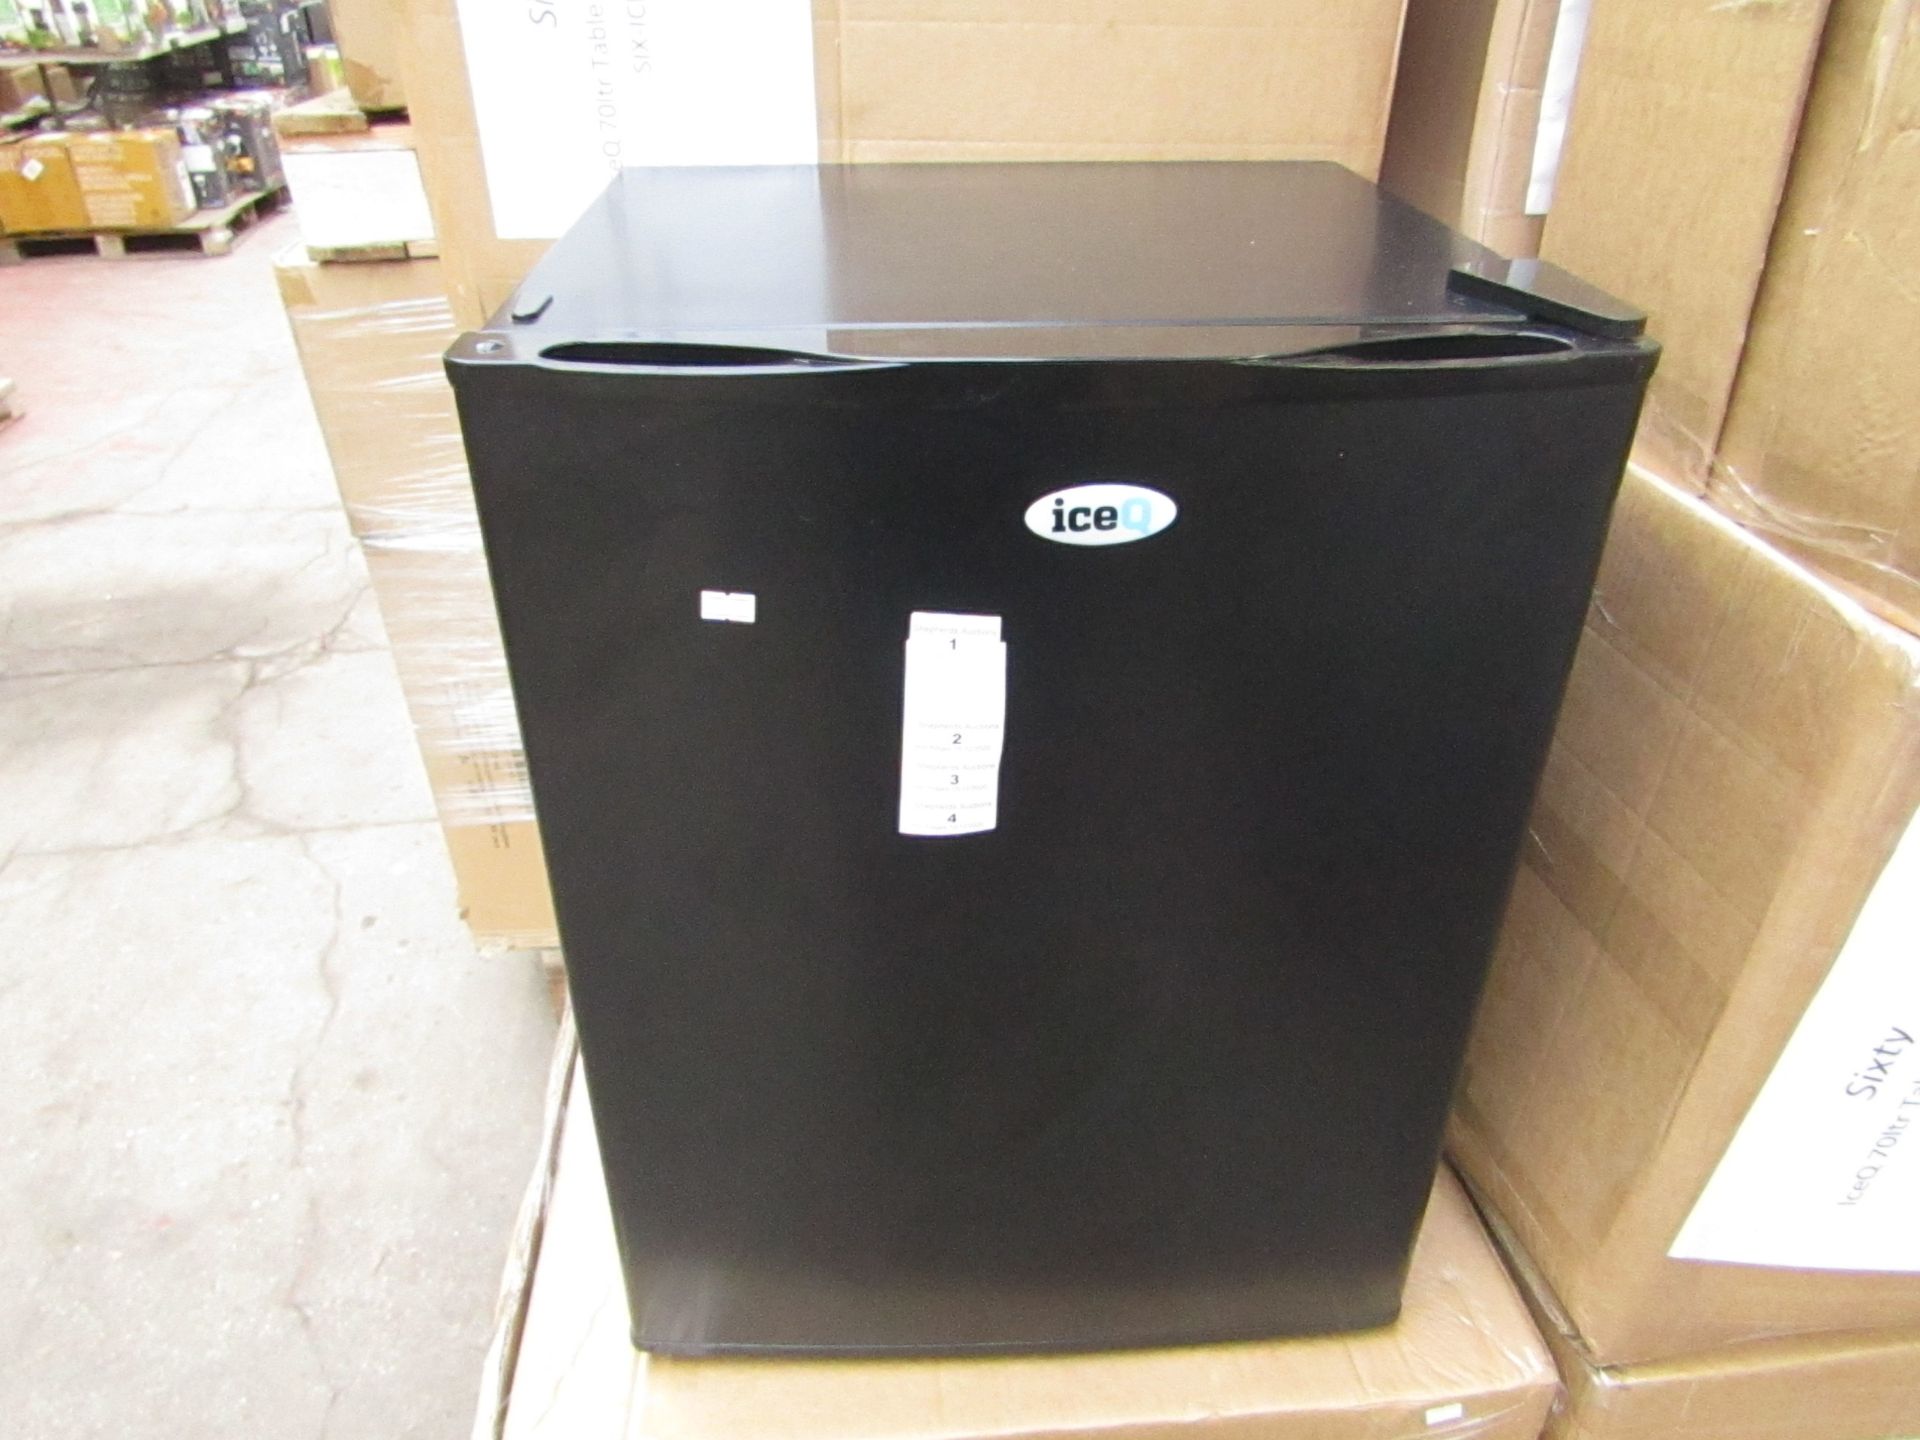 SIXTY IceQ 70ltr Table Top Fridge in Black, Refurbished RRP £119.99